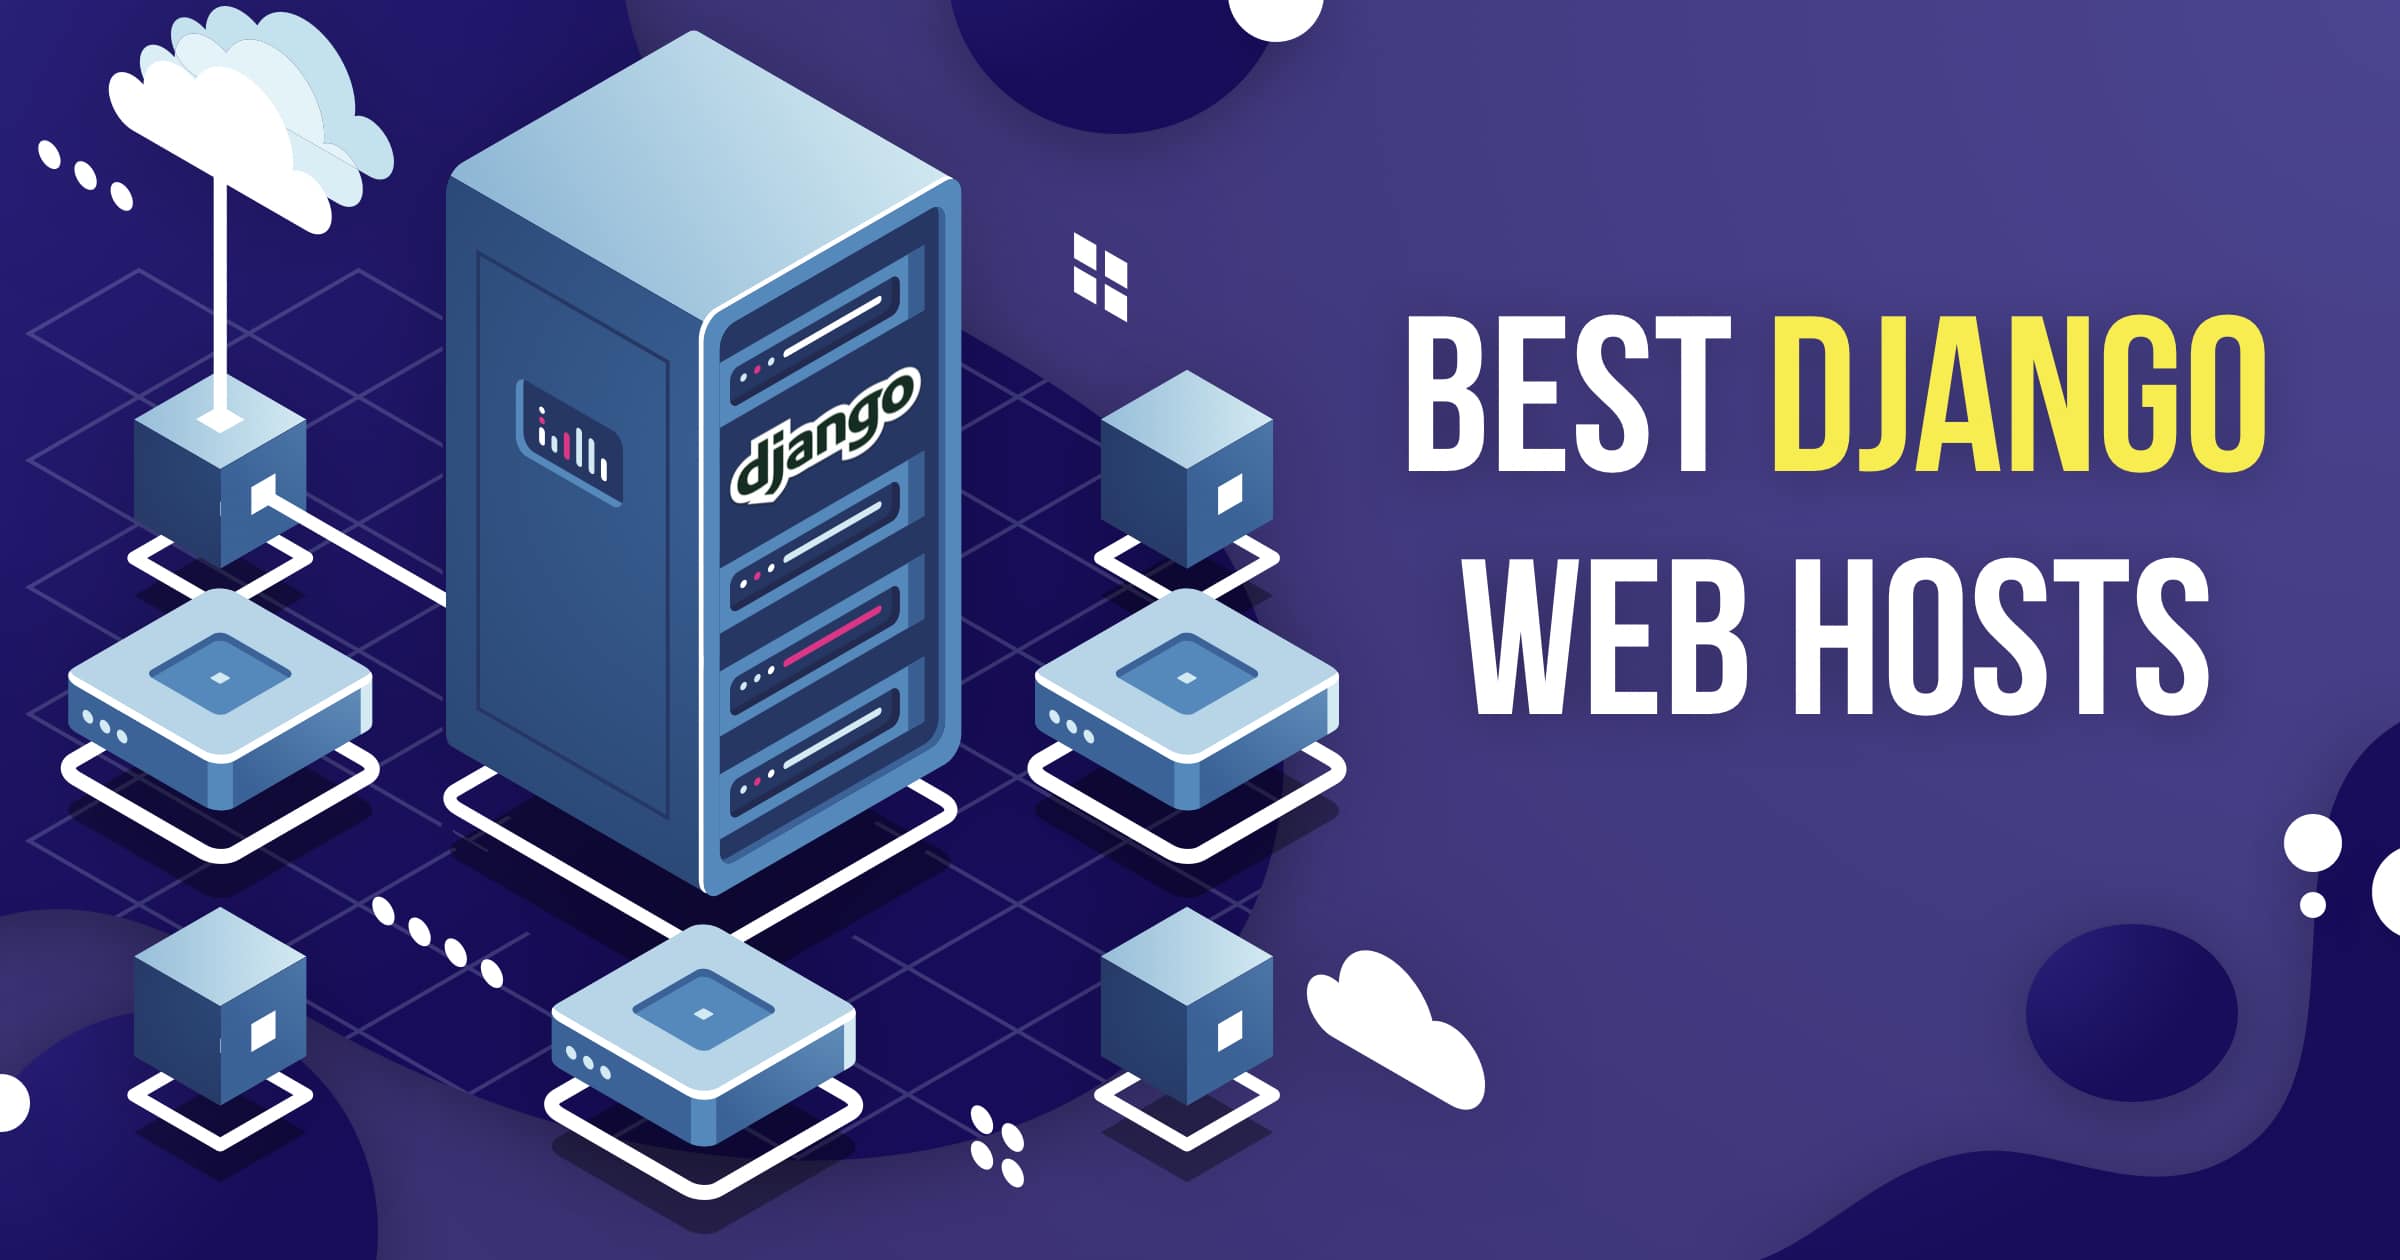 5 Best Django Hosting Services For Websites And Apps 2020 Update Images, Photos, Reviews